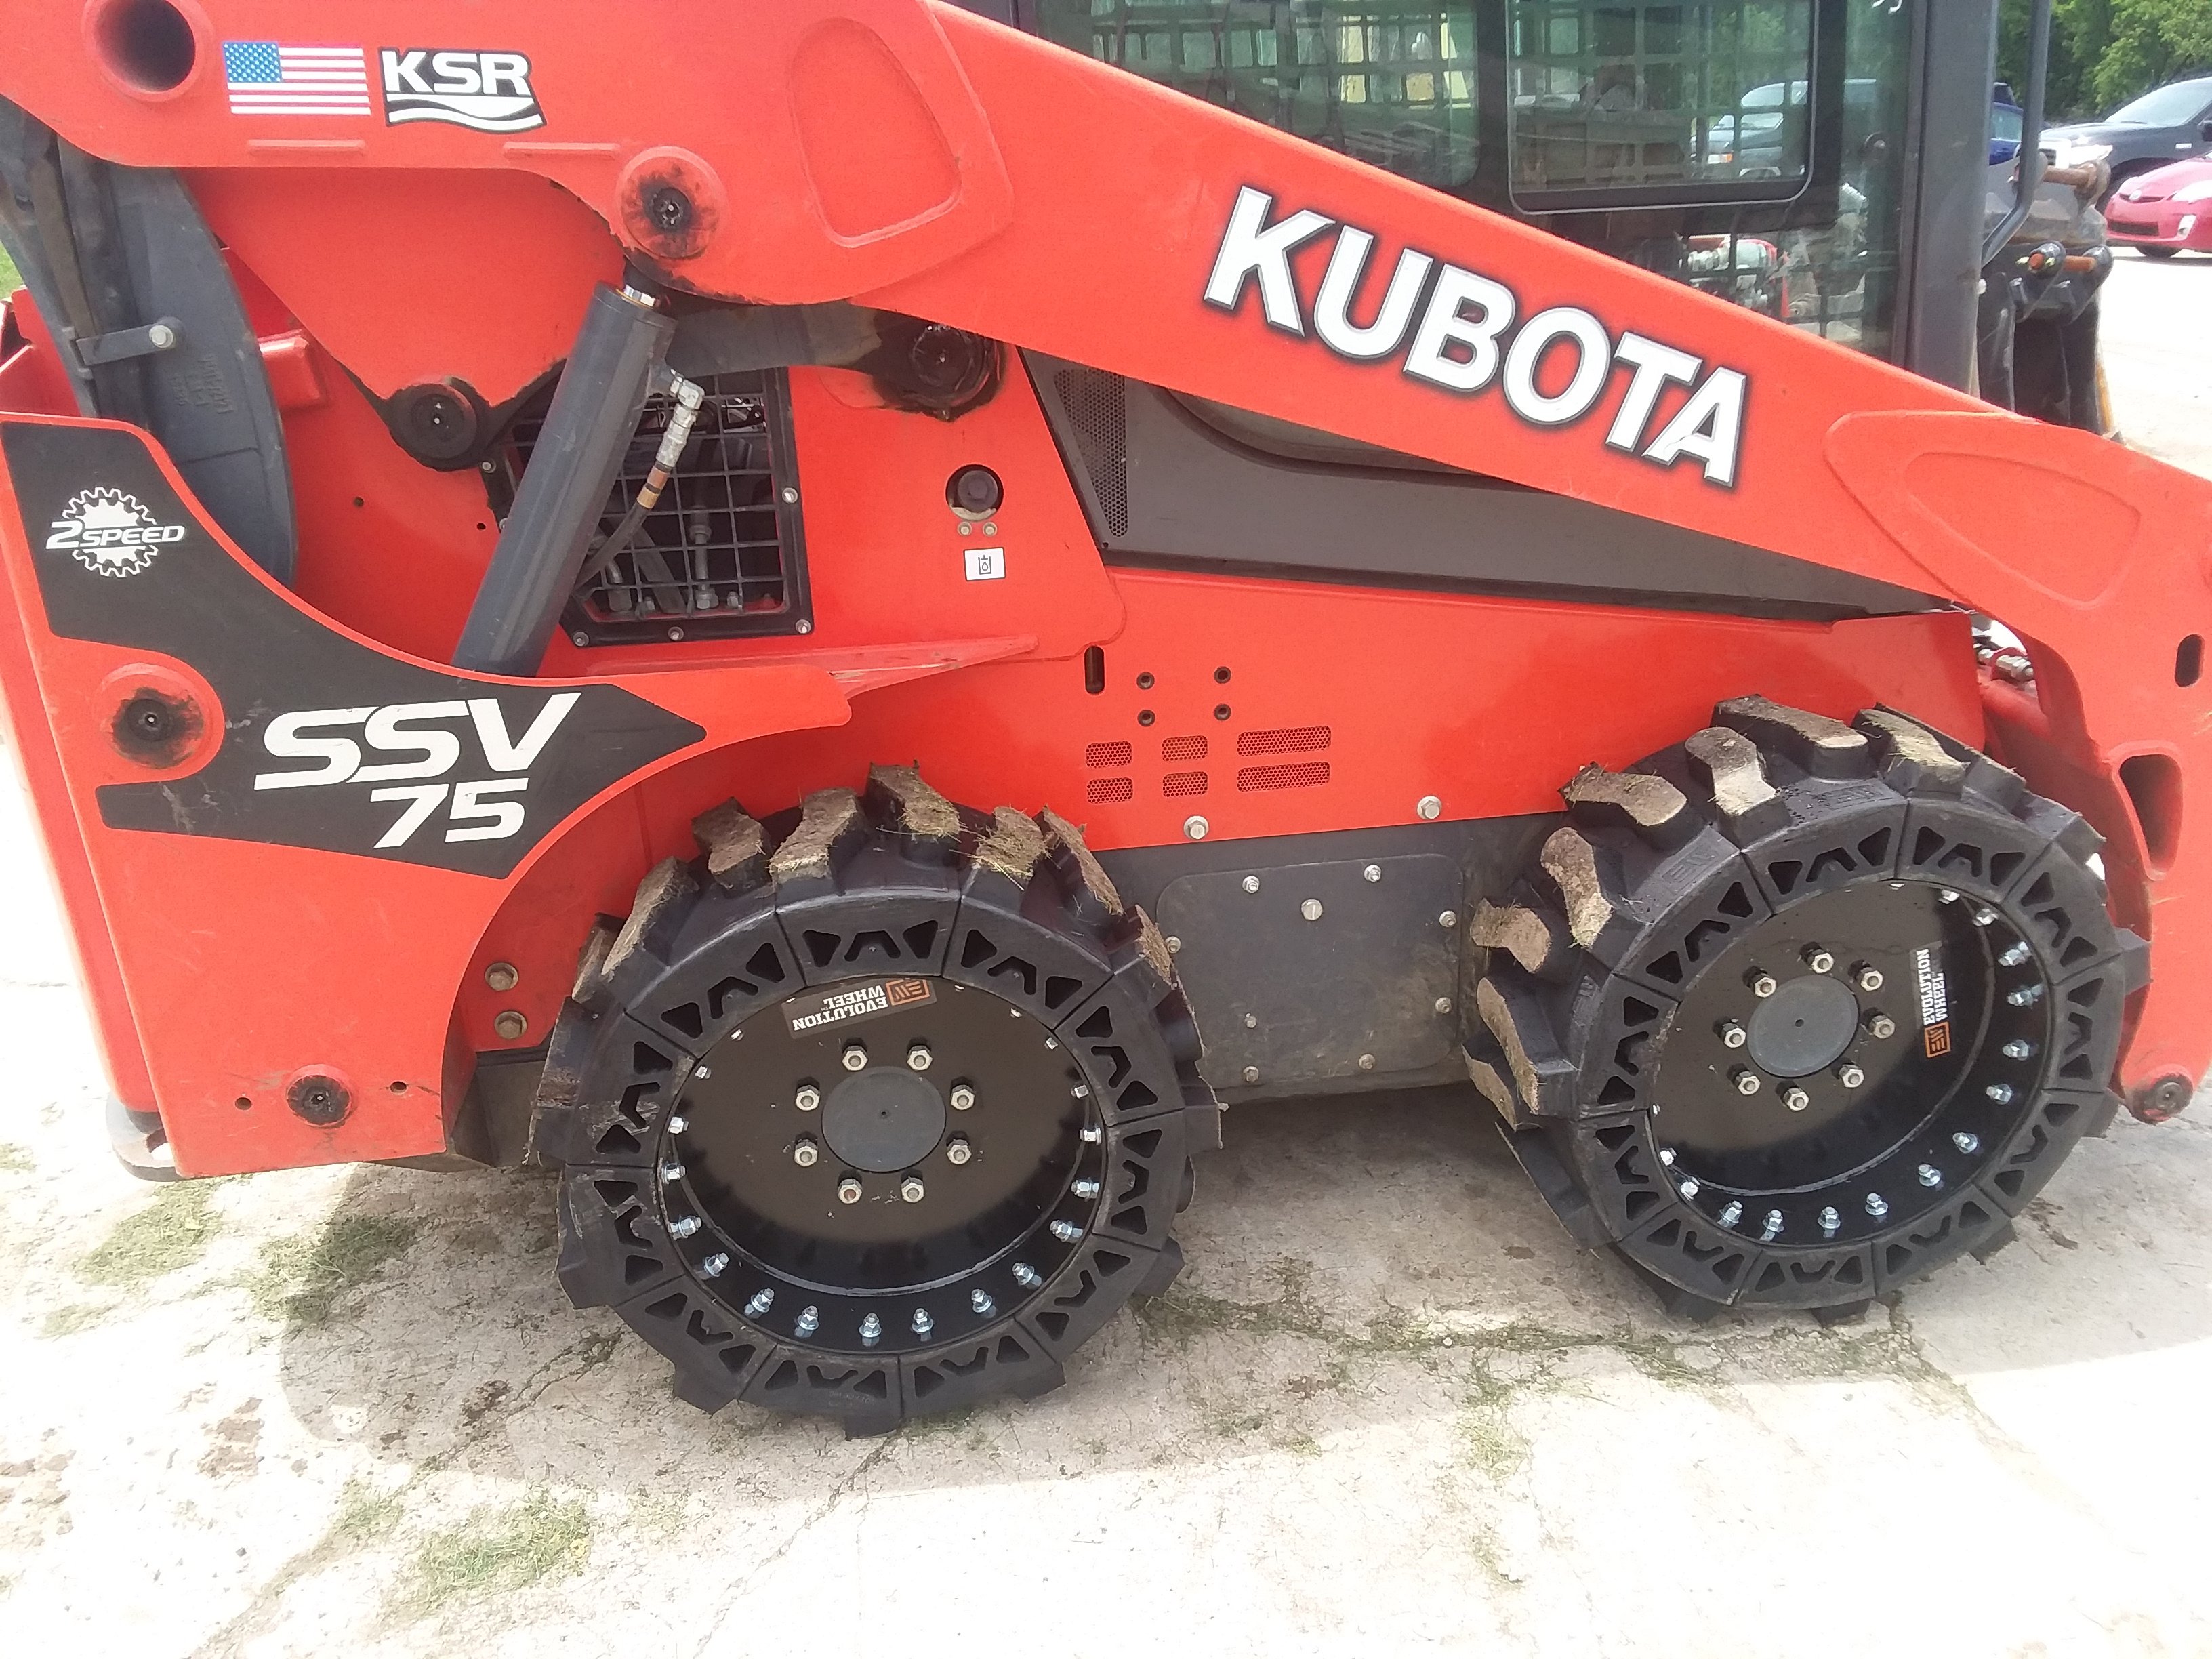 This images shows a red Kubota skid steer using our 14x17.5 Solid Skid Steer Tires